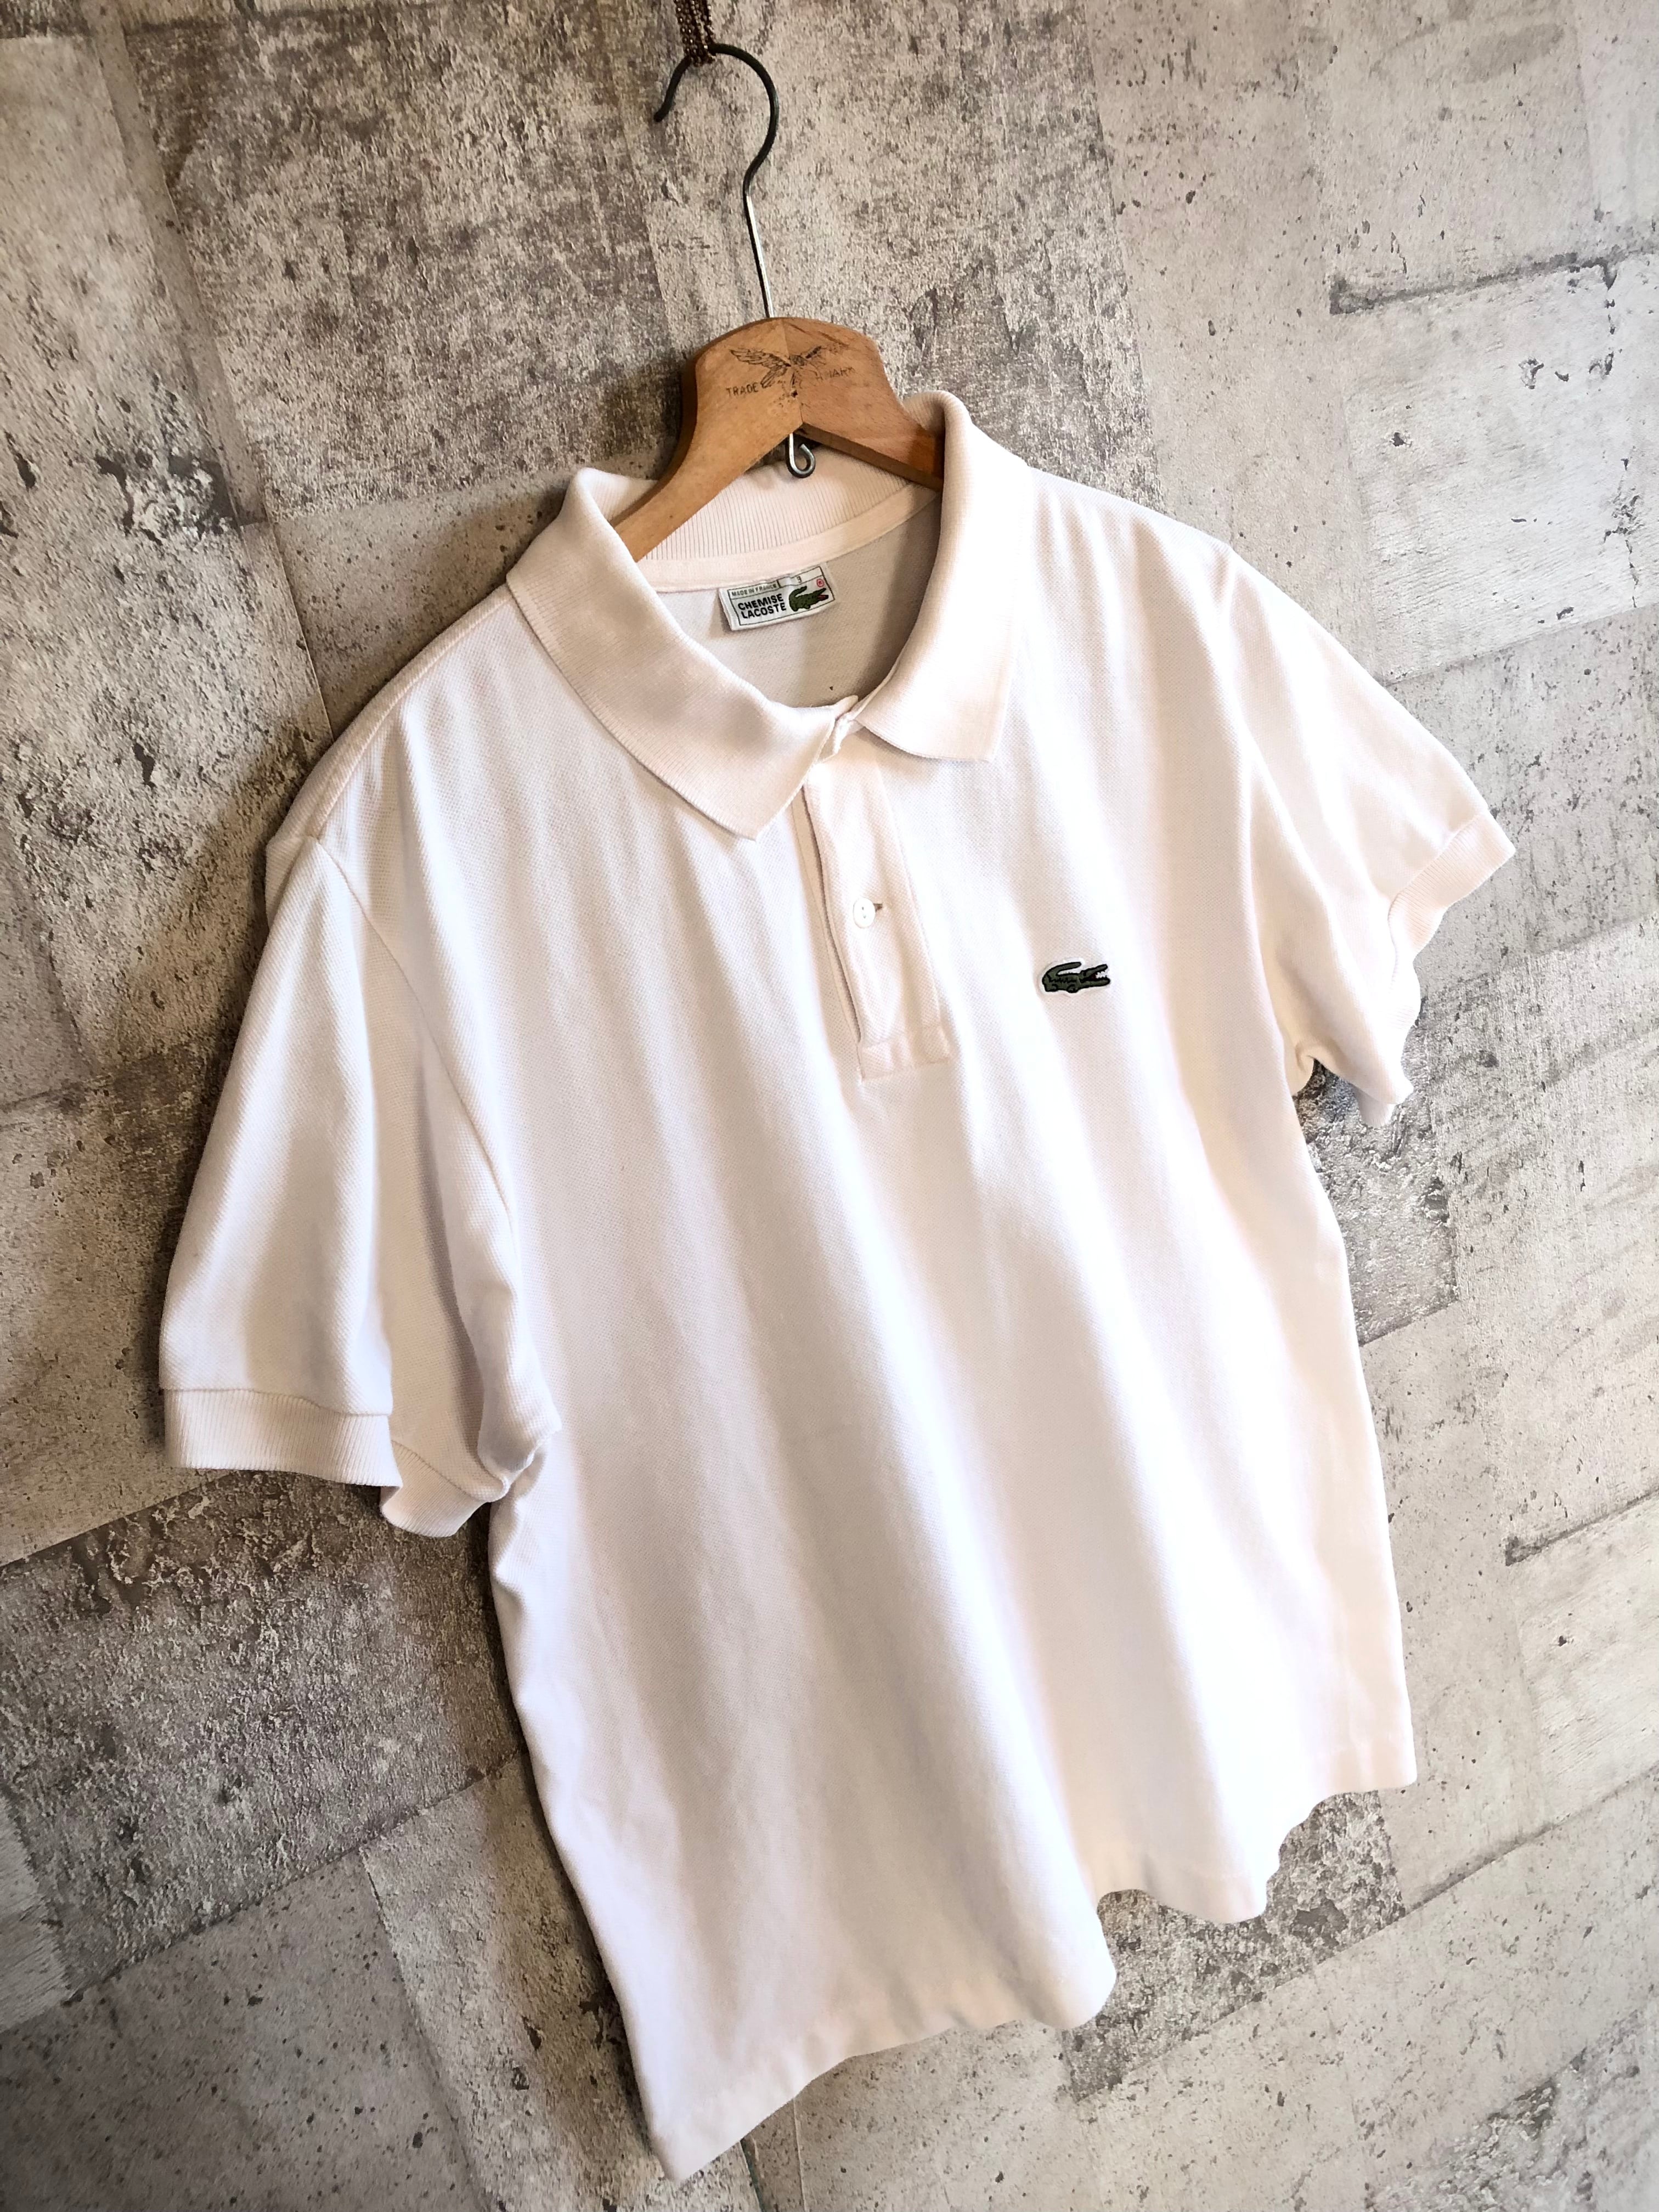 70s-80s FRANCE製 LACOSTE - 5191L / L1212 S/S POLO SHIRT OLD